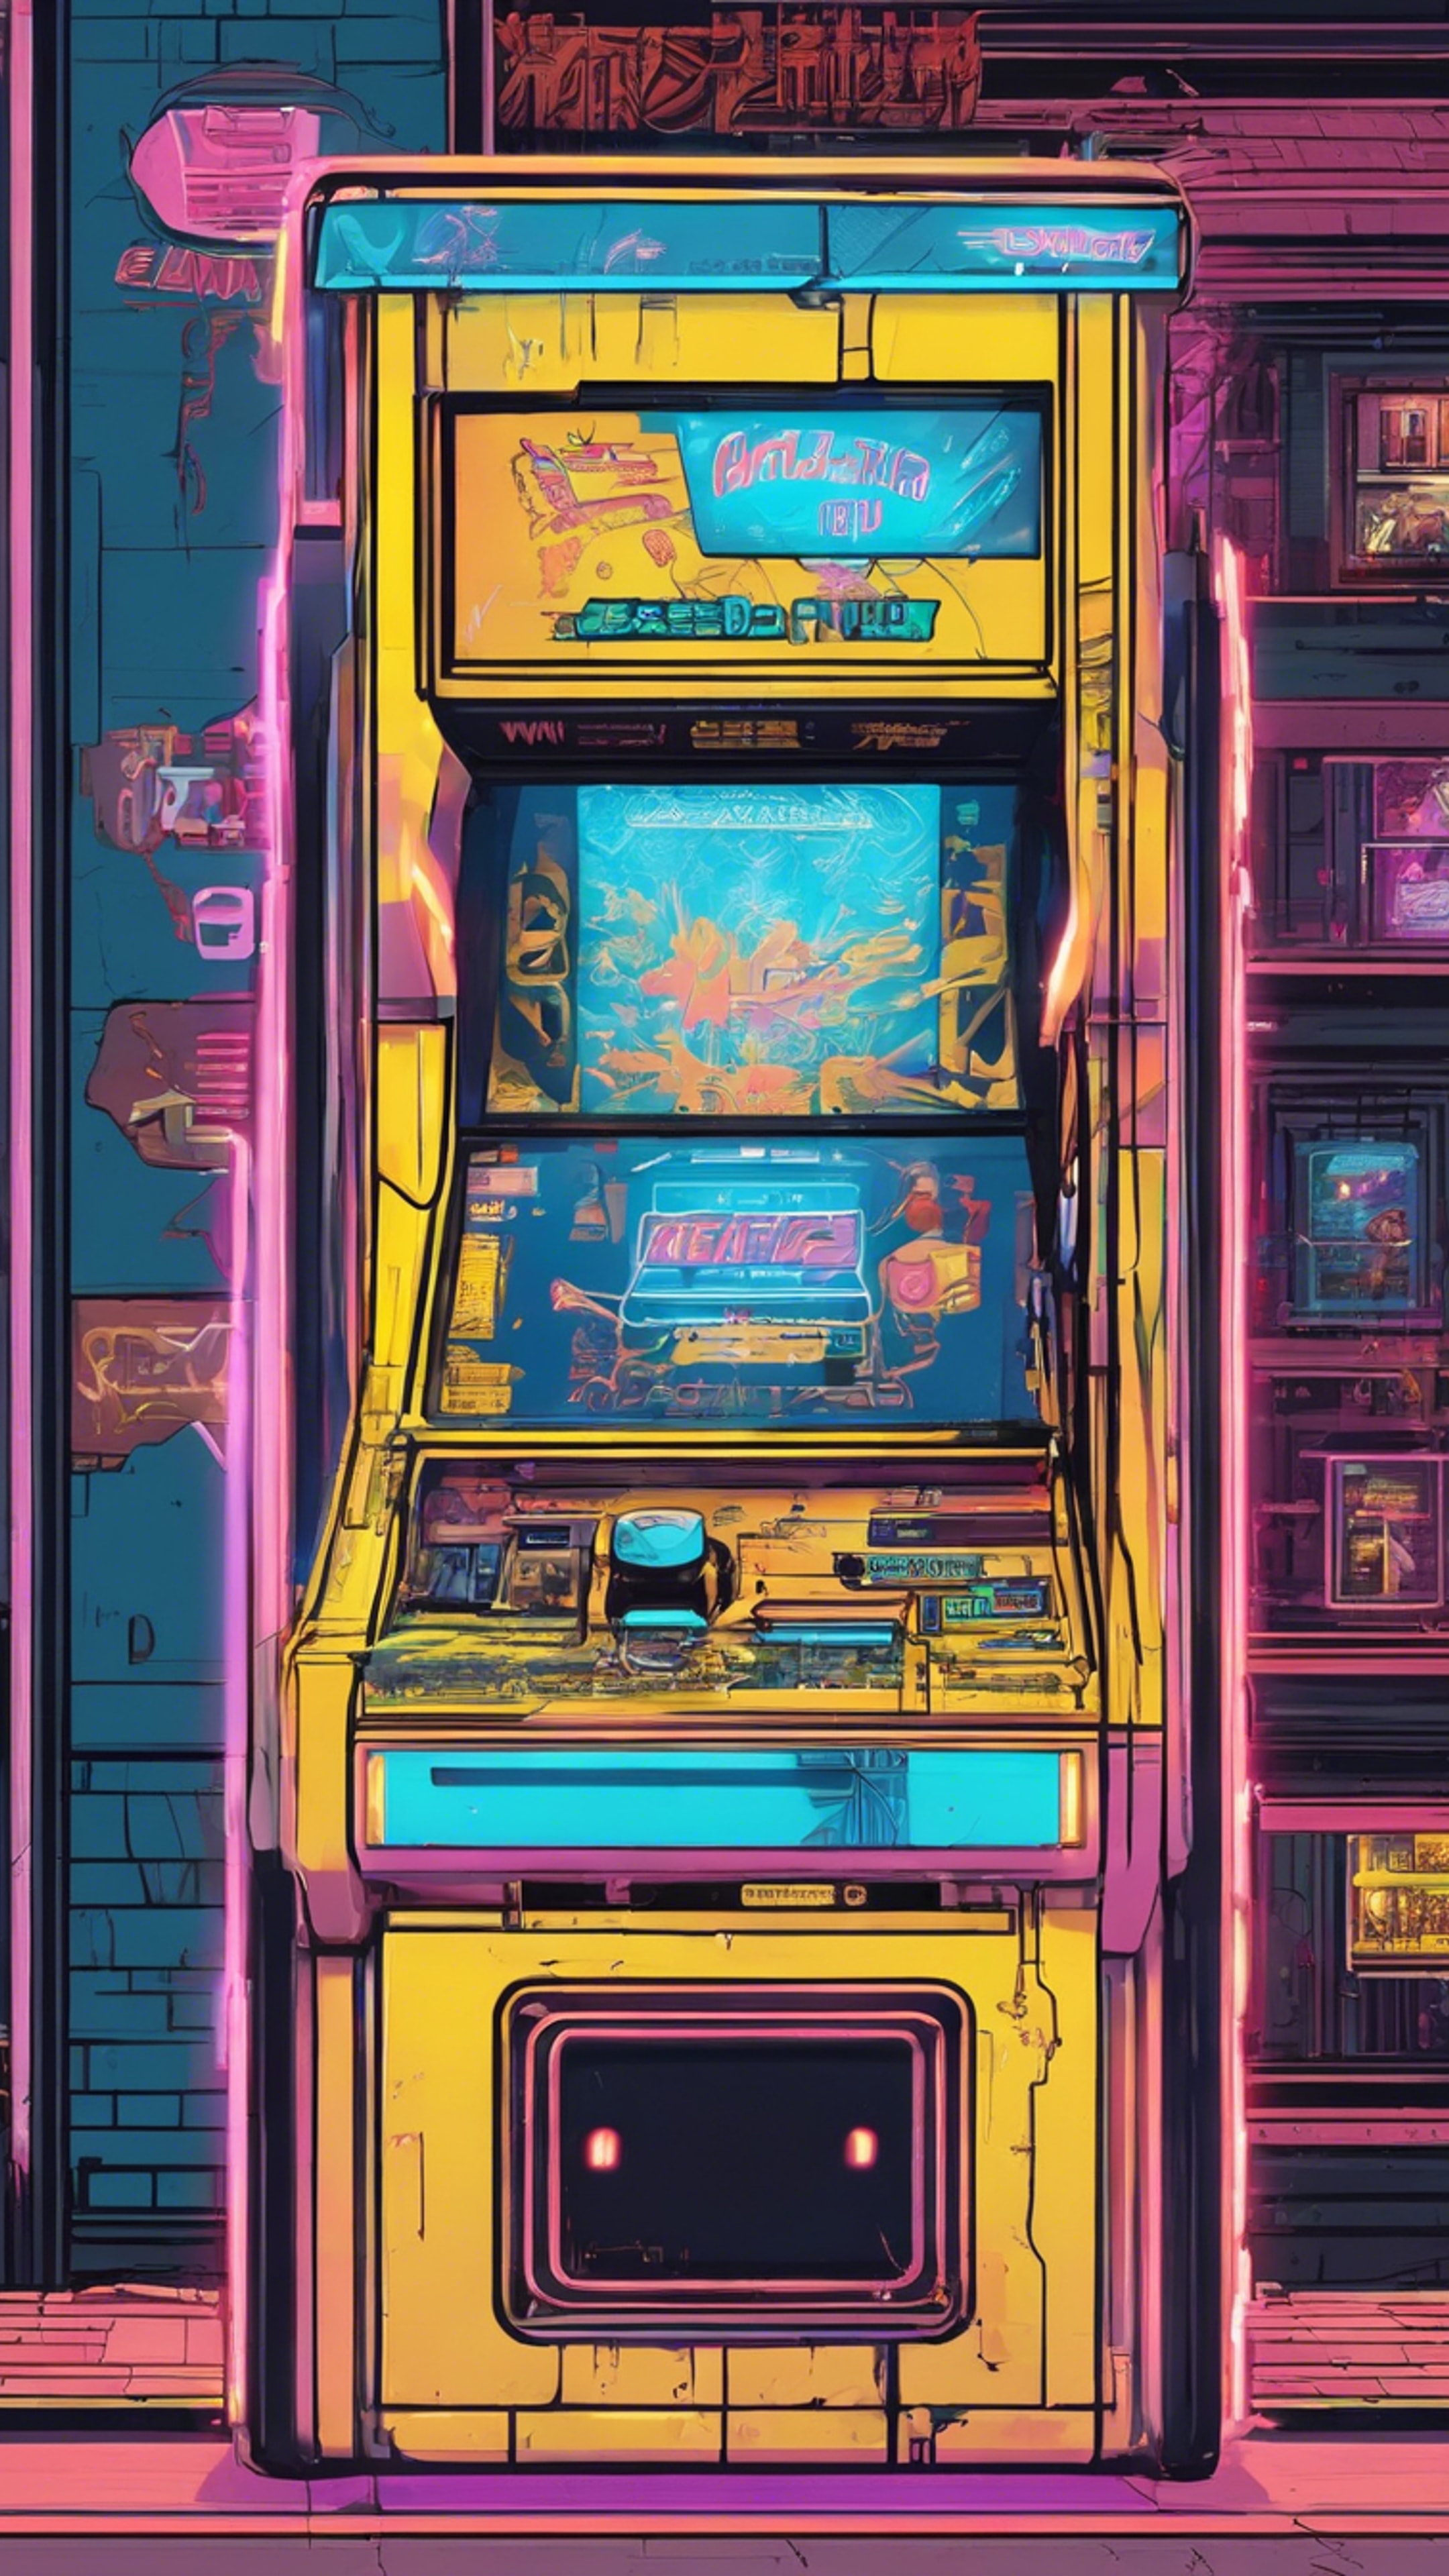 A vintage arcade machine with blue and yellow detailing, set in a retro game shop. Behang[7a93d221b5de45b8b20a]